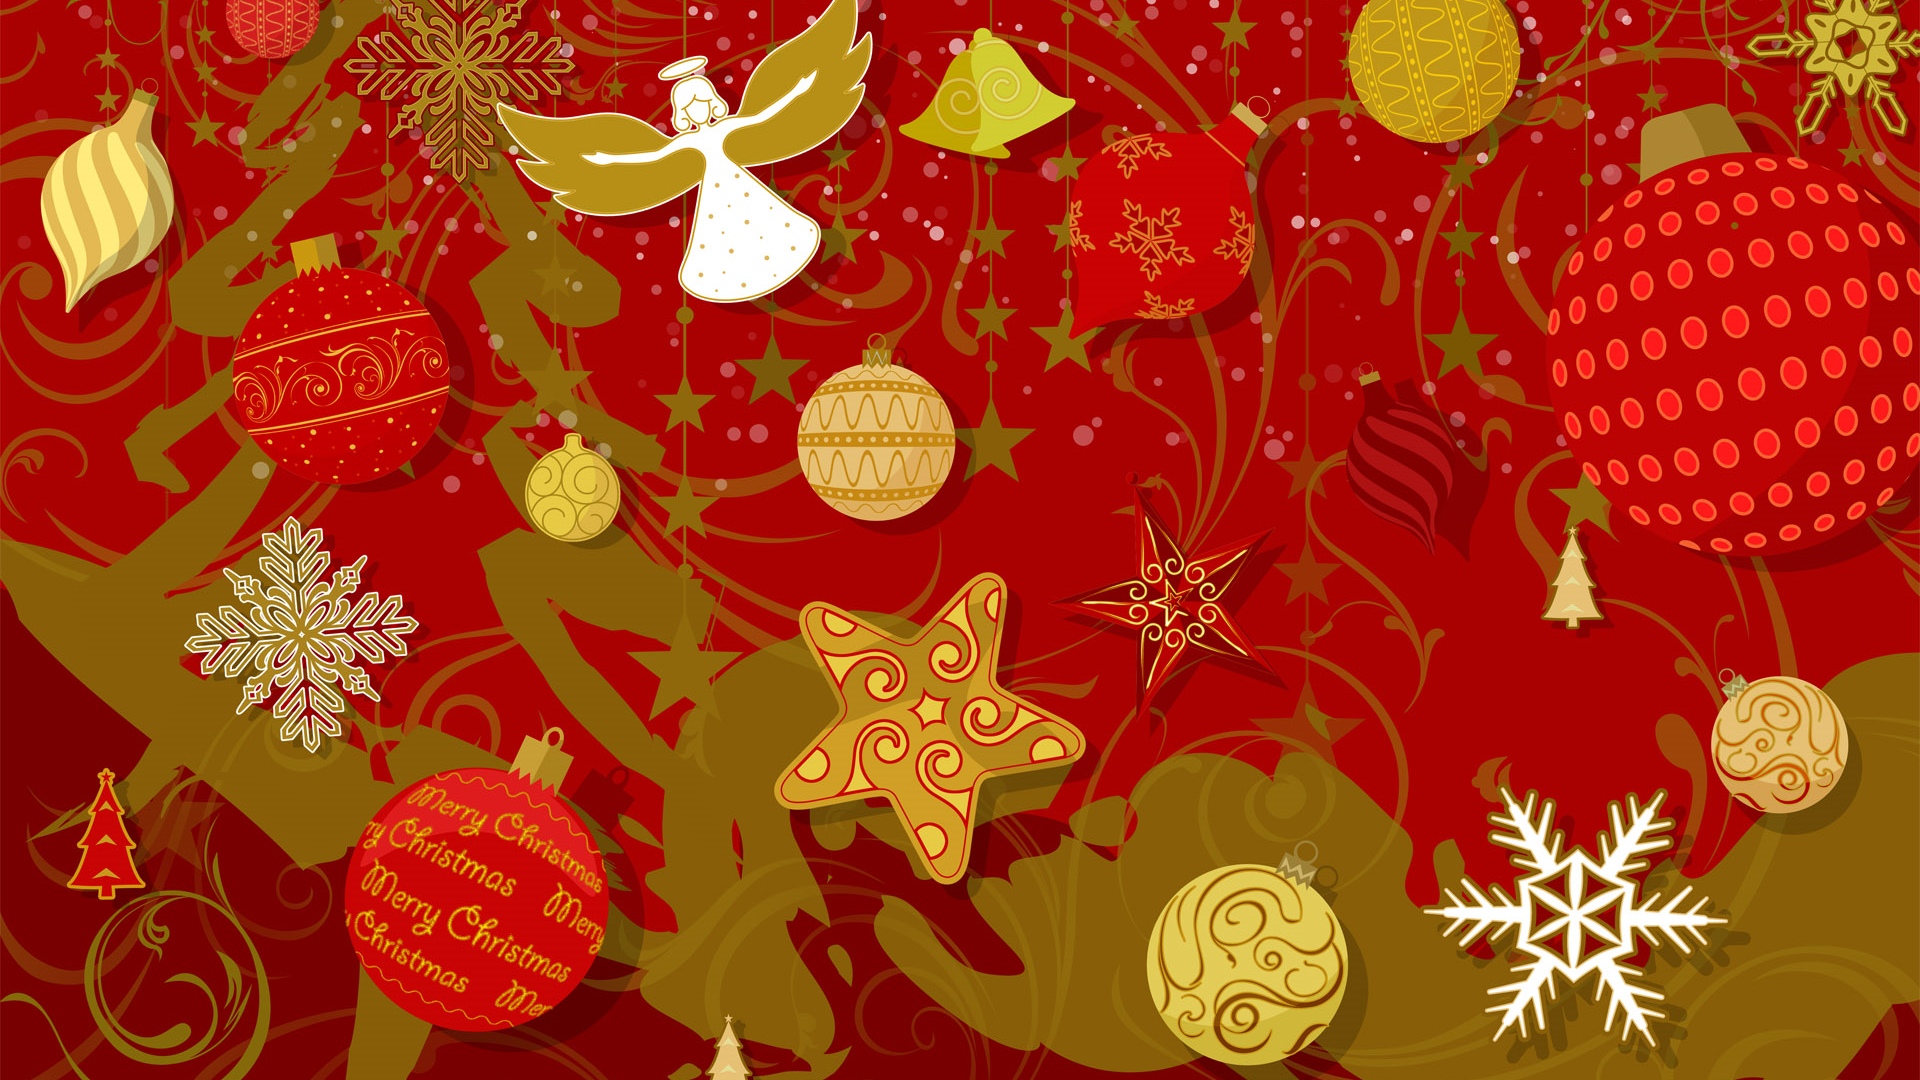 Christmas-Wallpaper-186 | wallpapers55.com - Best Wallpapers for ...